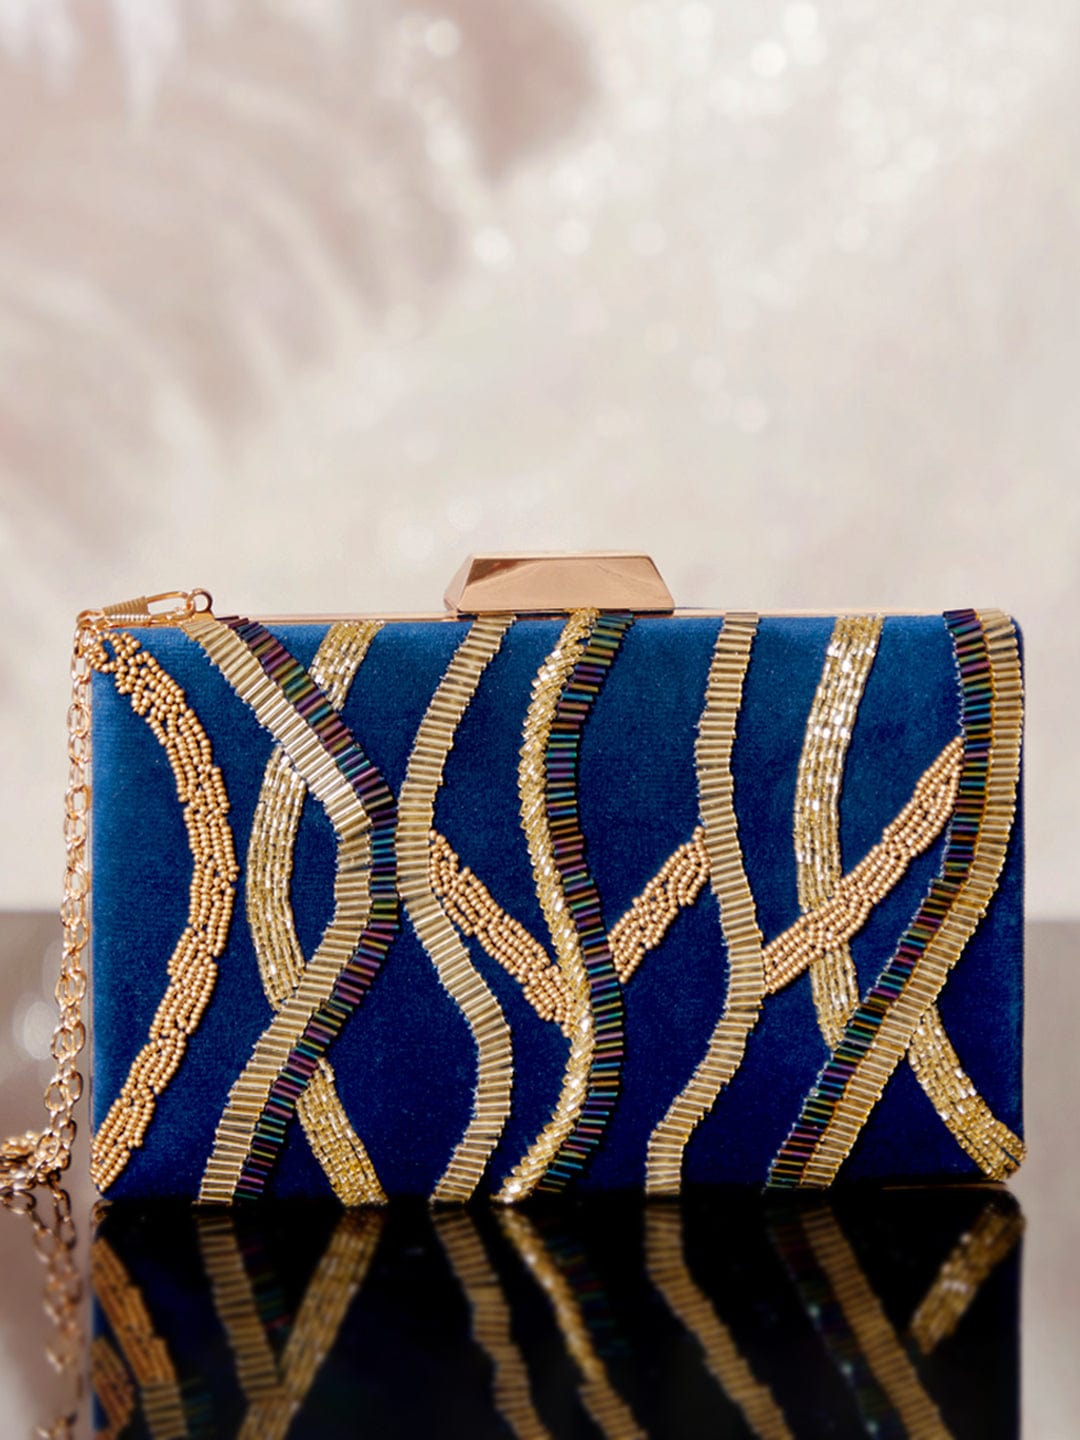 Rubans Blue Colour Box Clutch With Embroided Gold Design. Handbag & Wallet Accessories